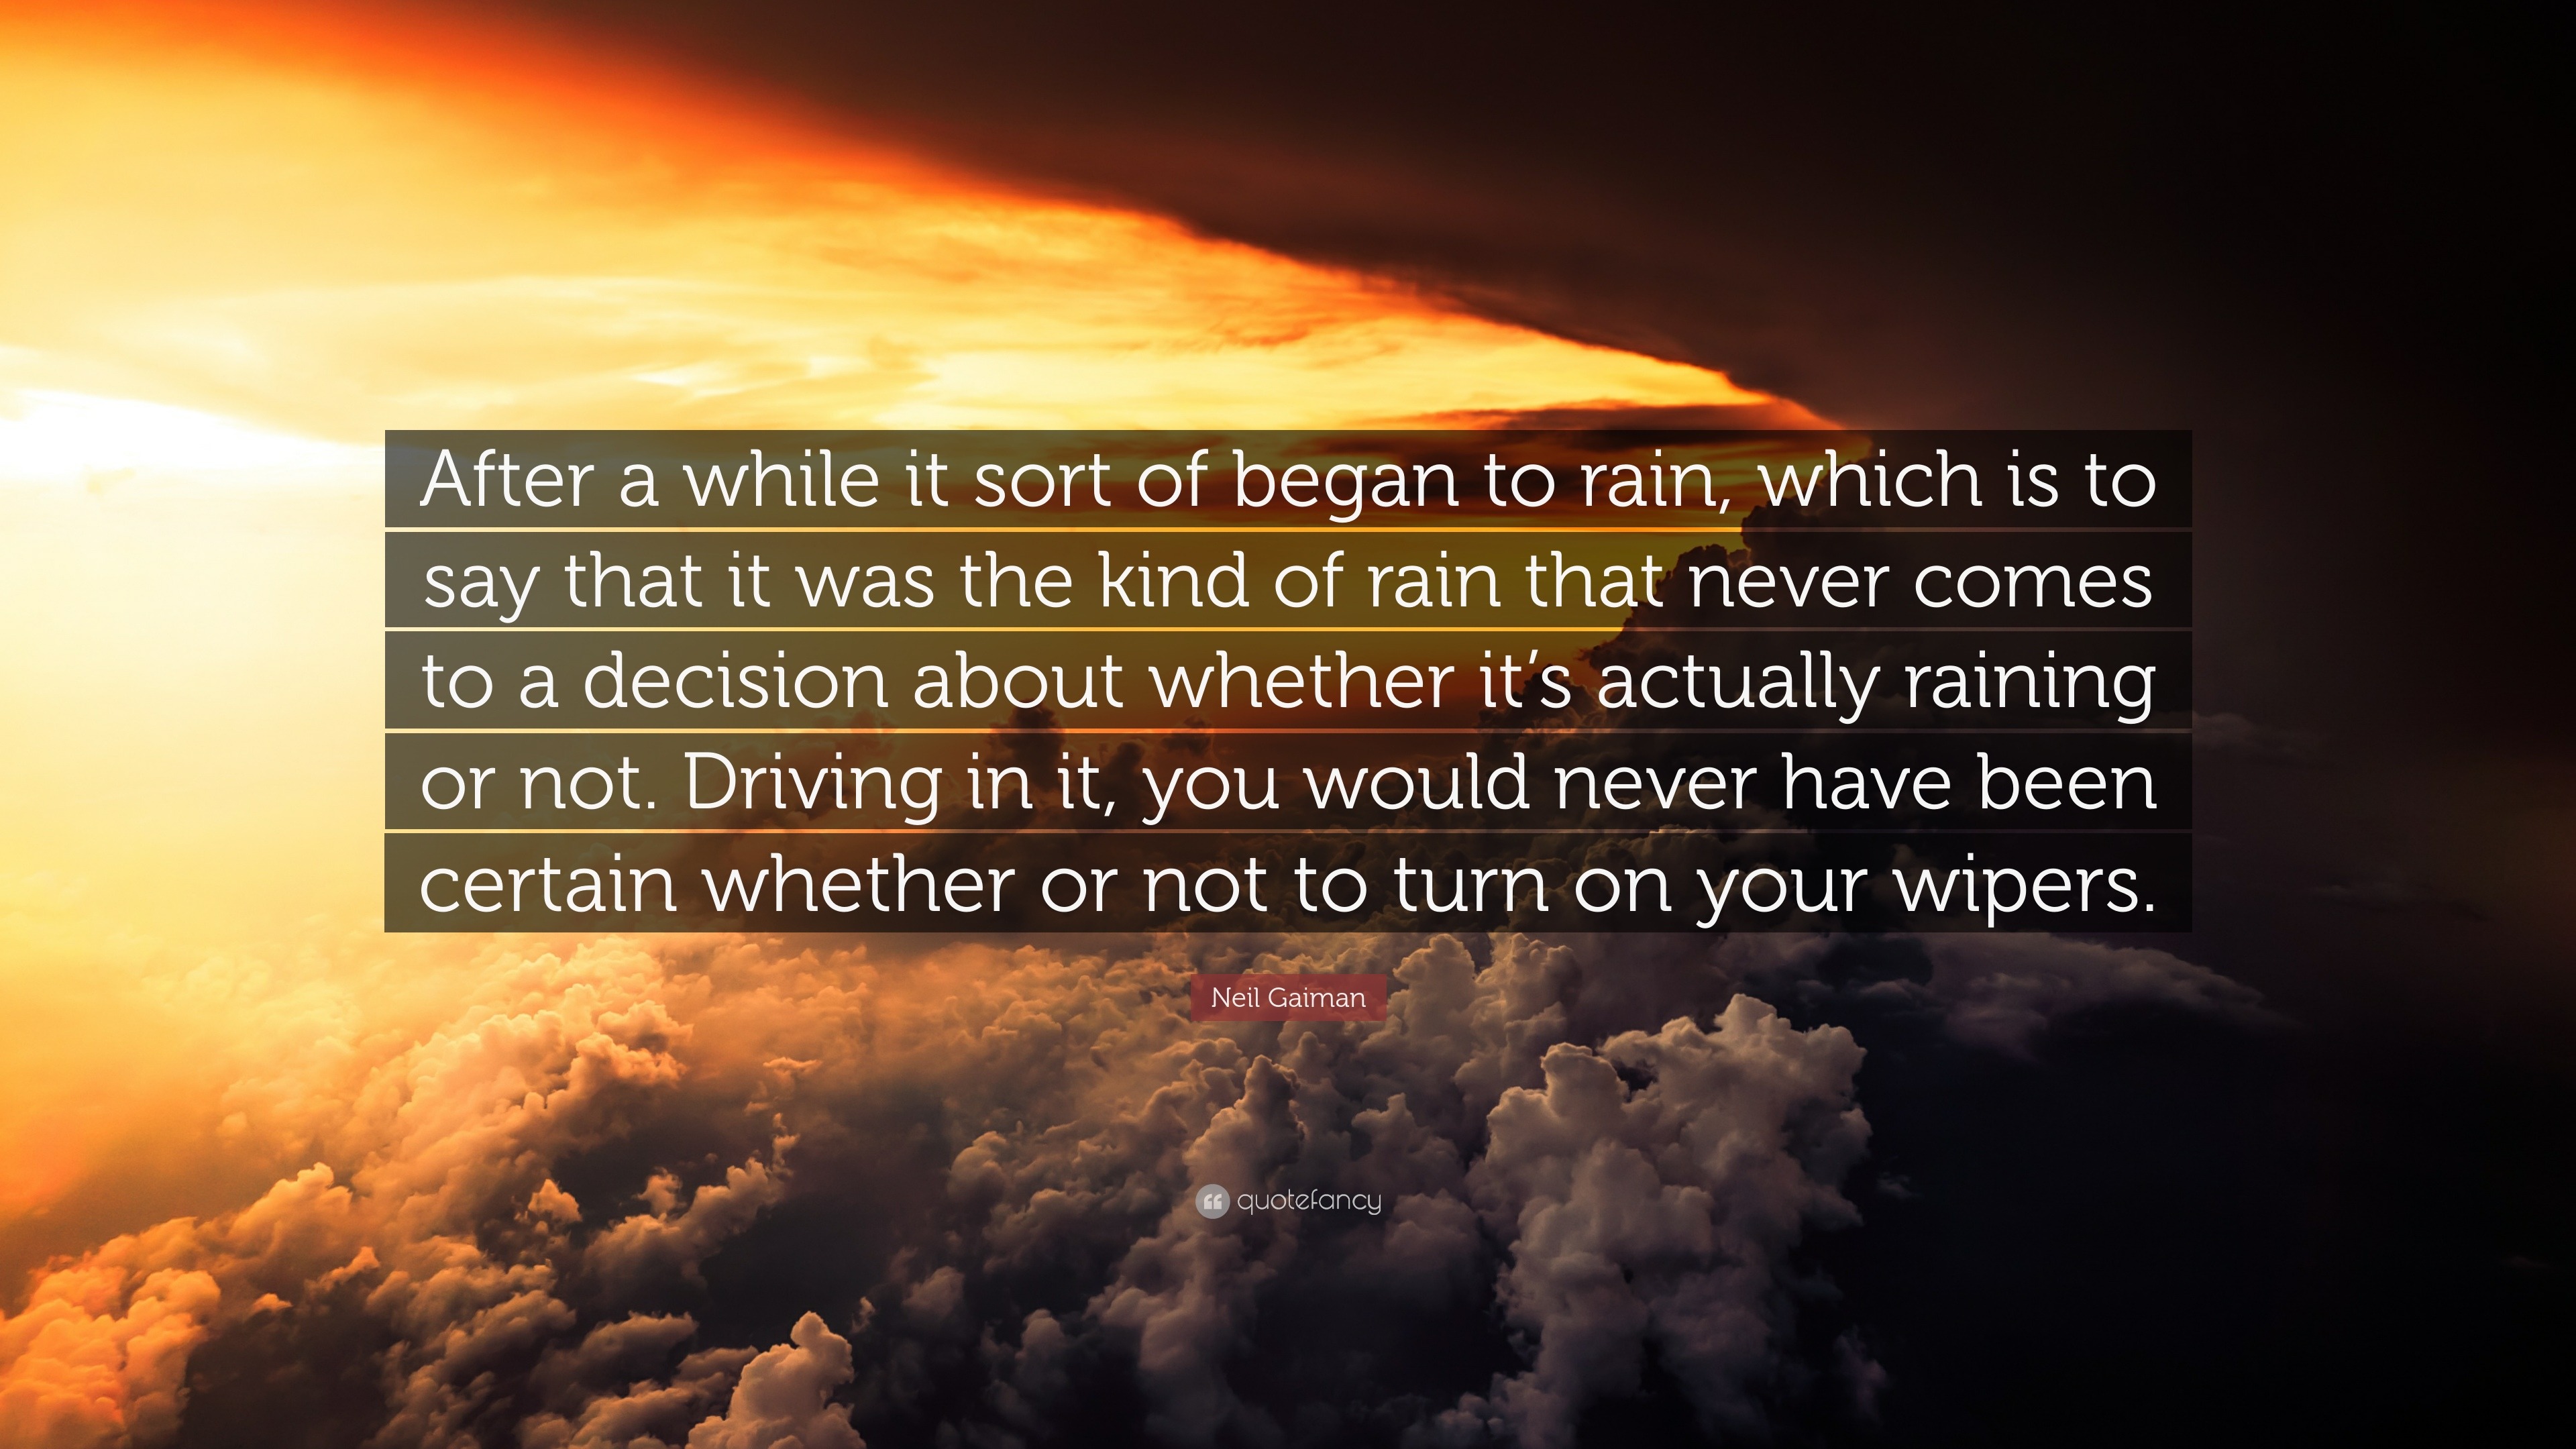 Neil Gaiman Quote: “After a while it sort of began to rain, which is to ...